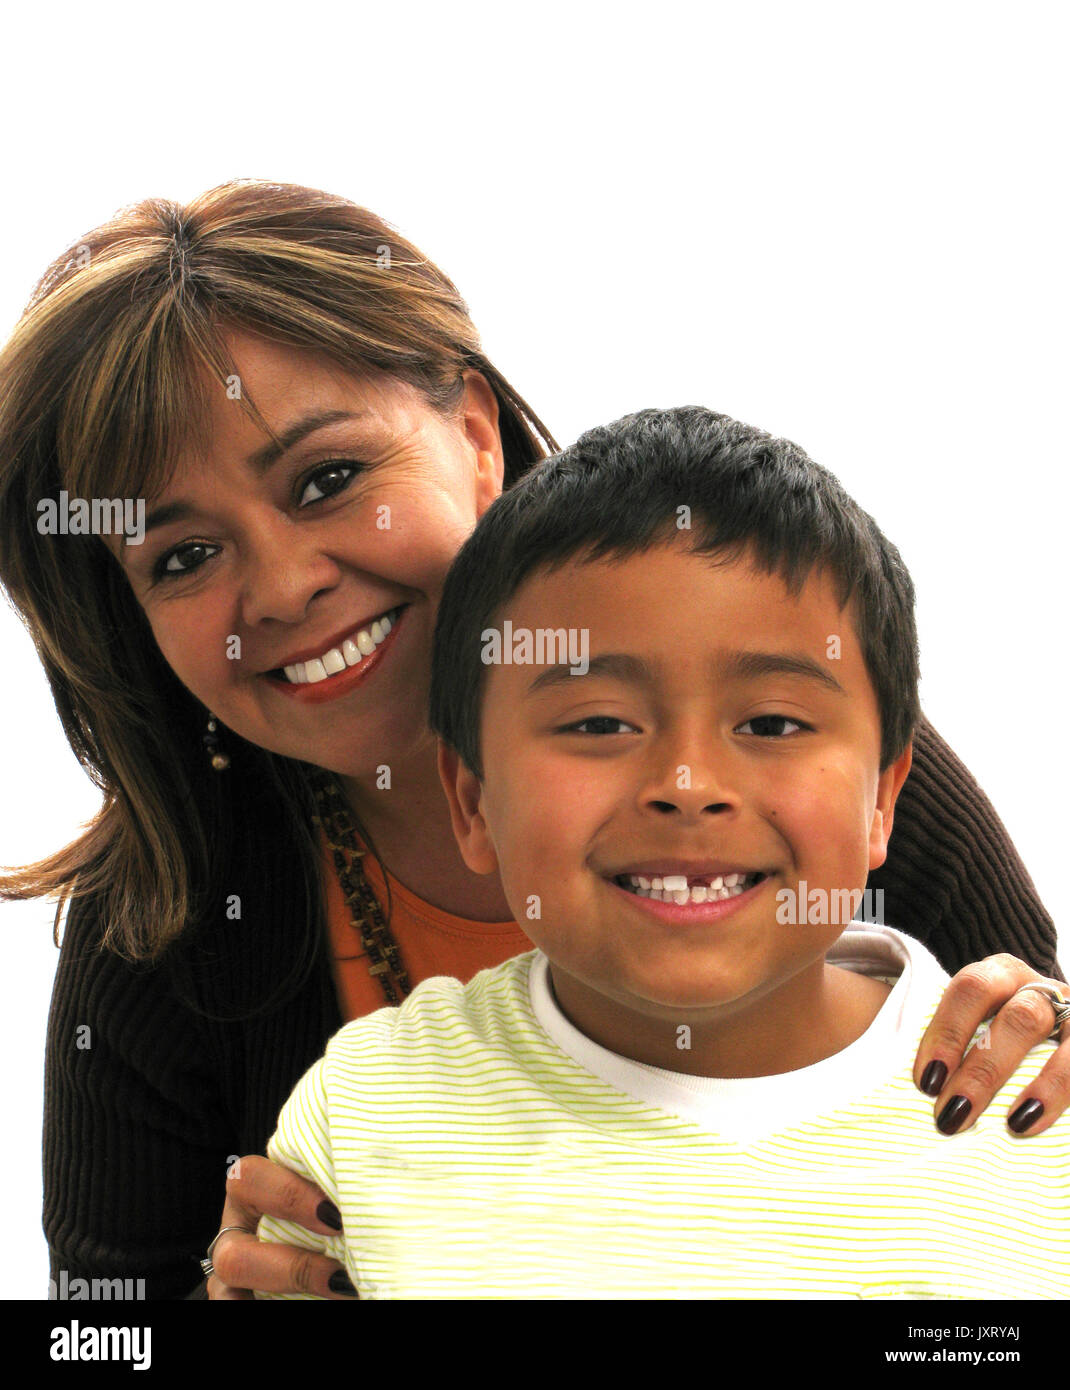 Smiling mother and son over white background Stock Photo